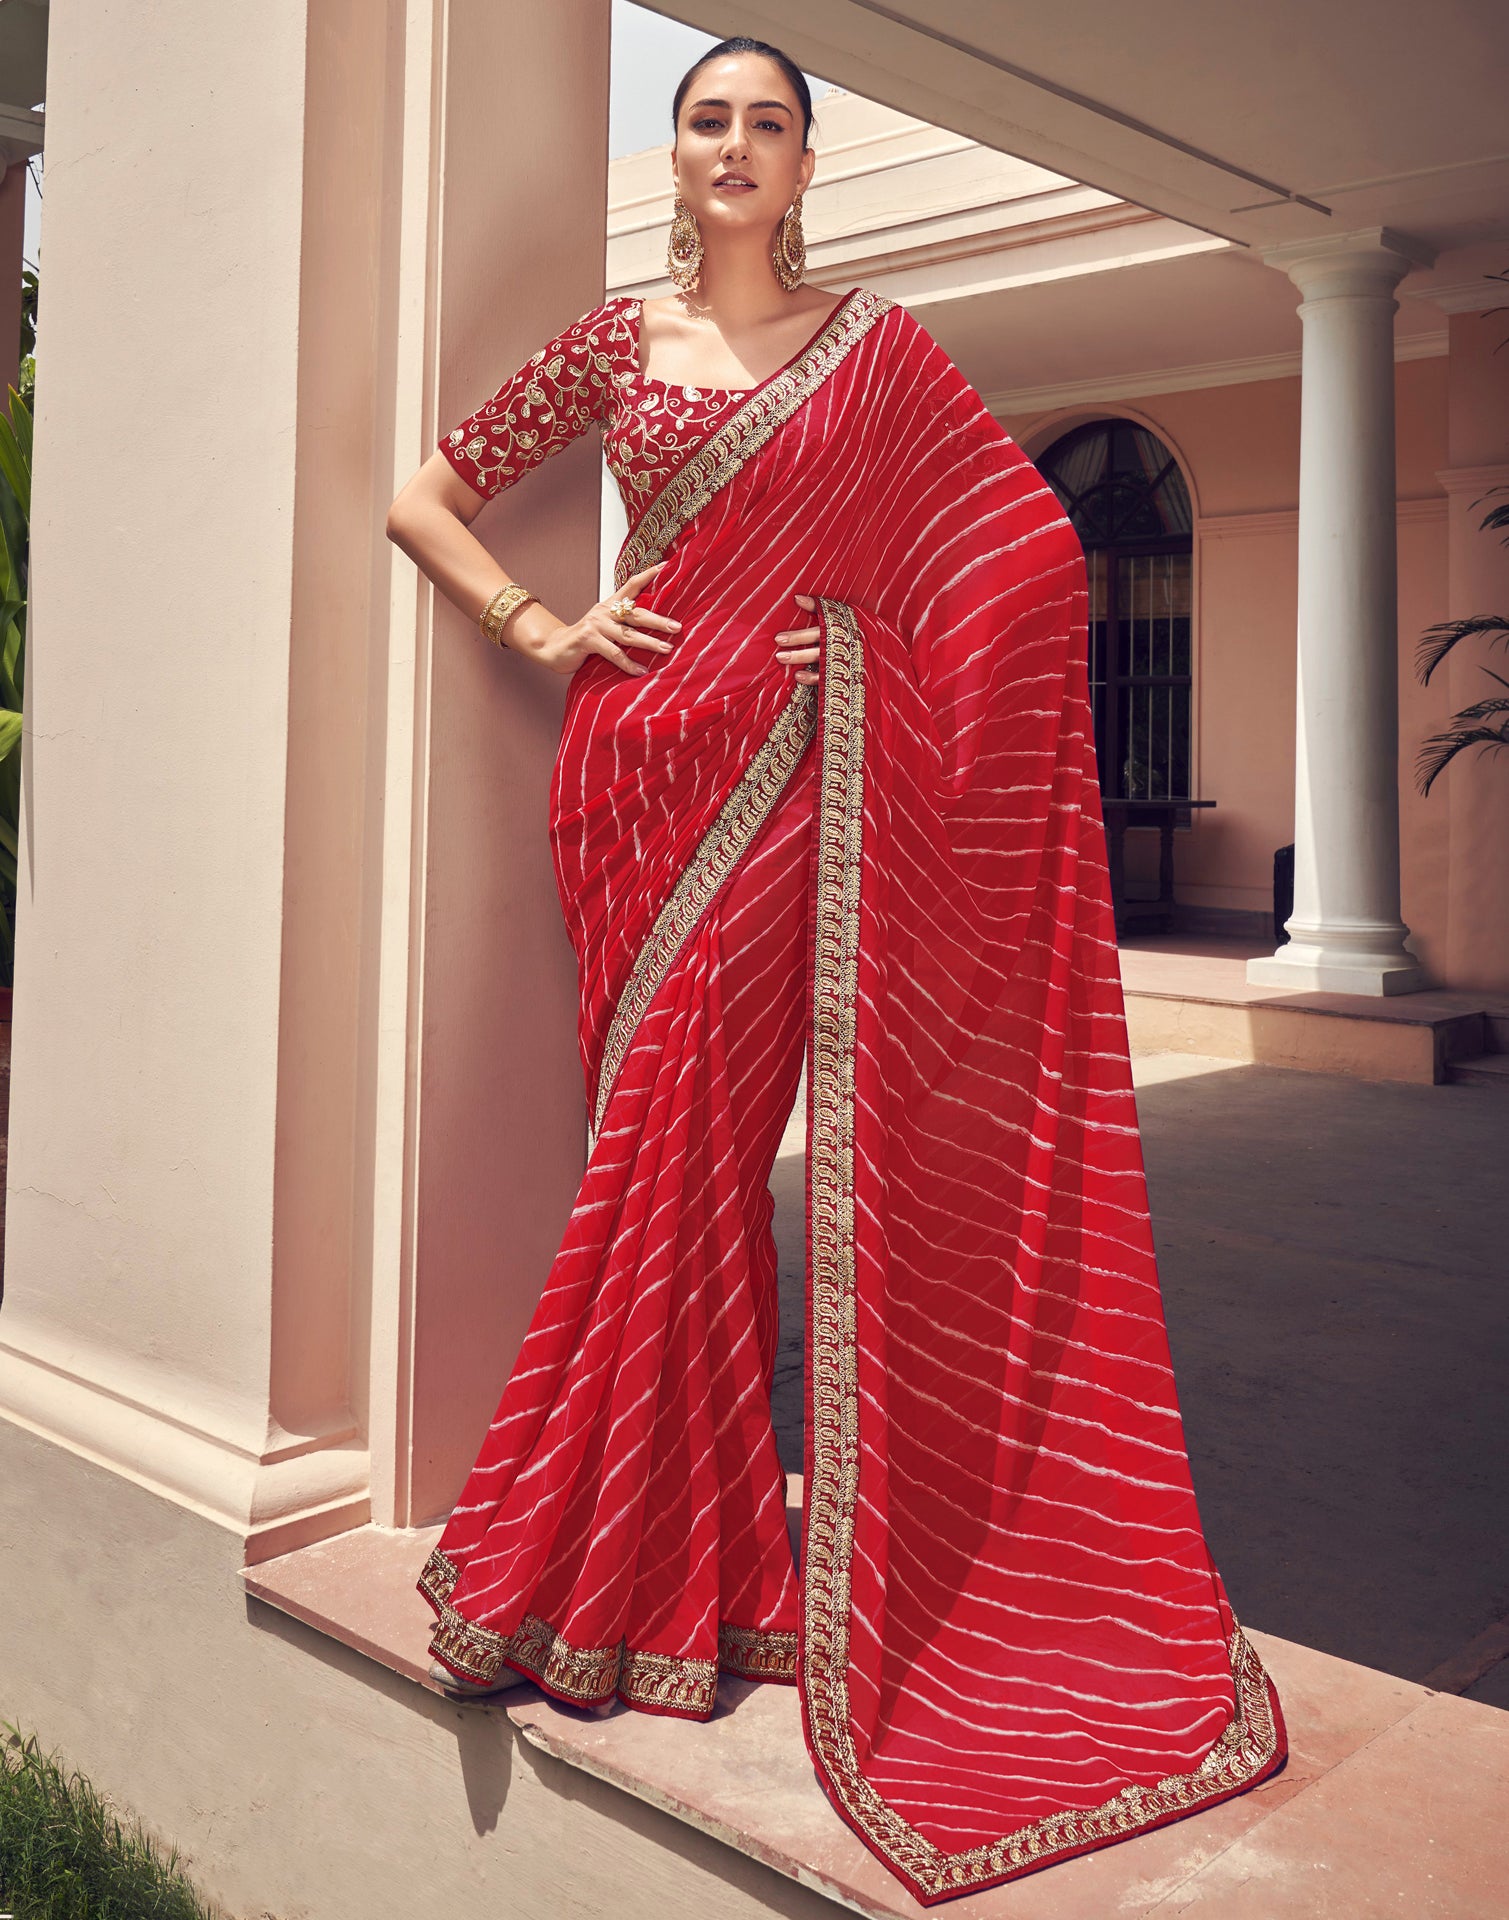 Red Georgette Saree With Embroidered Heavy Blouse 3064SR09